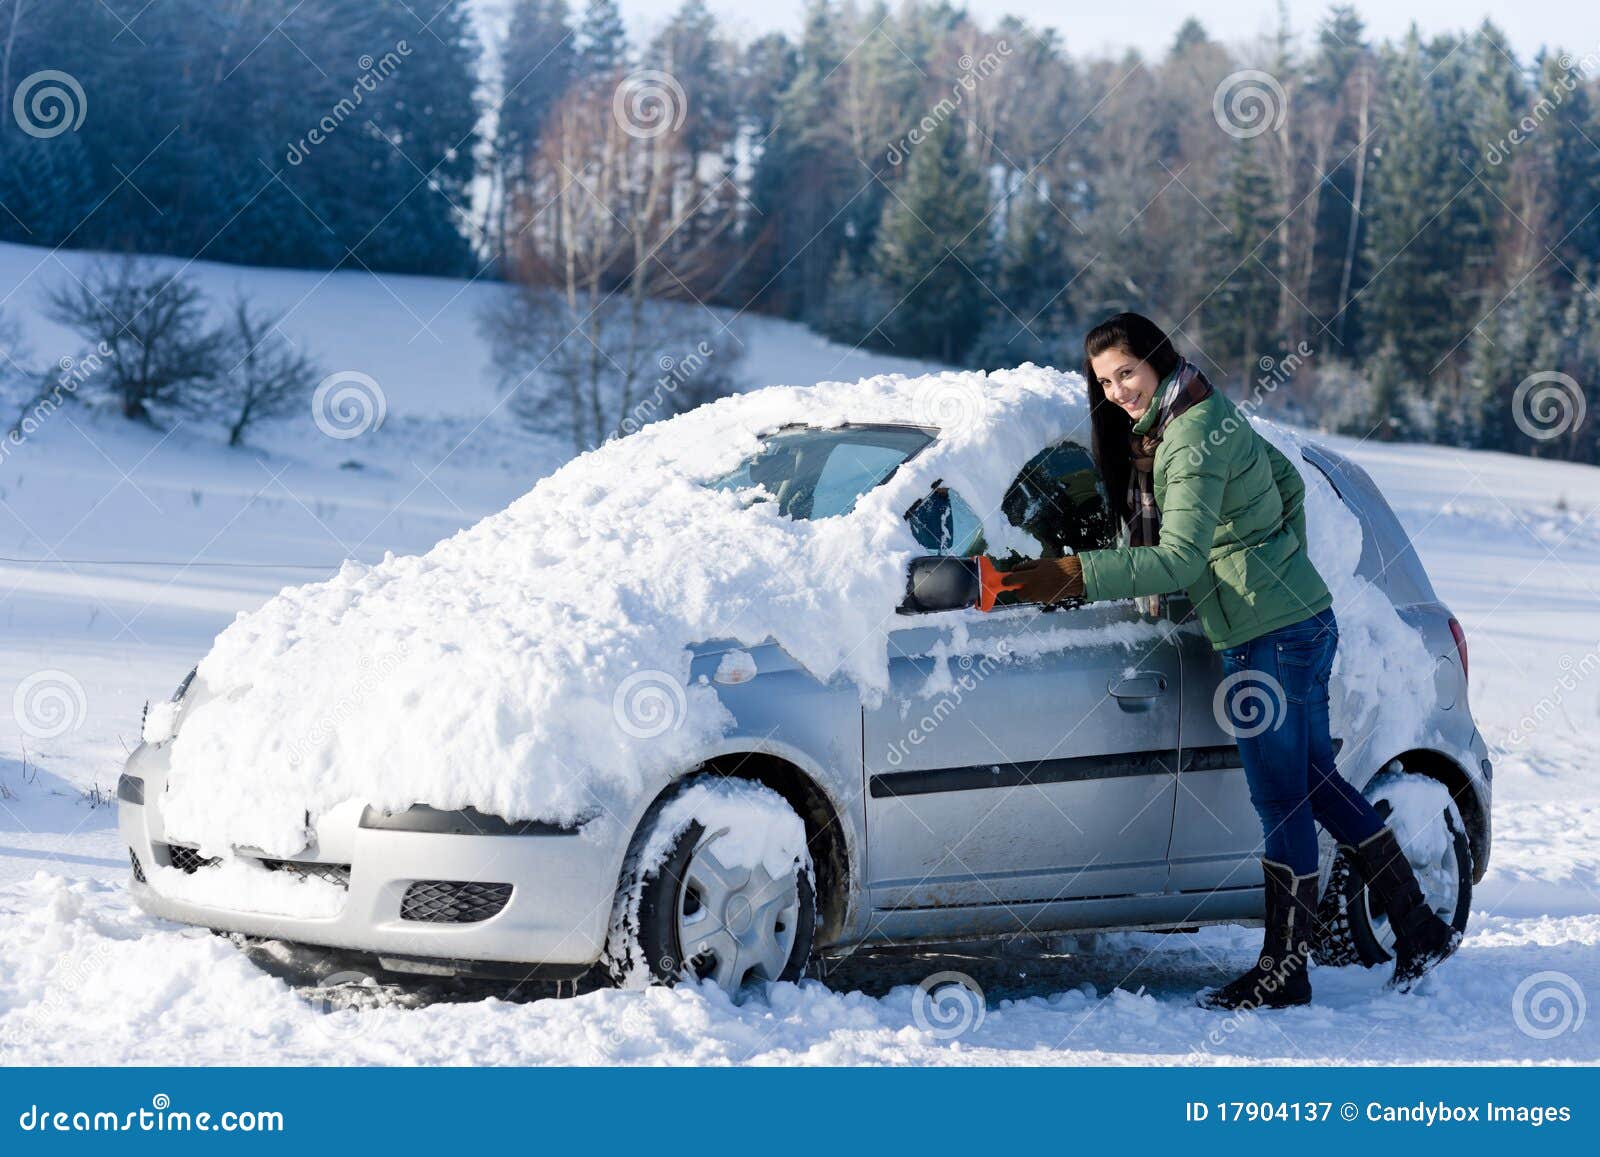 Winter car - woman remove snow from windshield with ice scraper